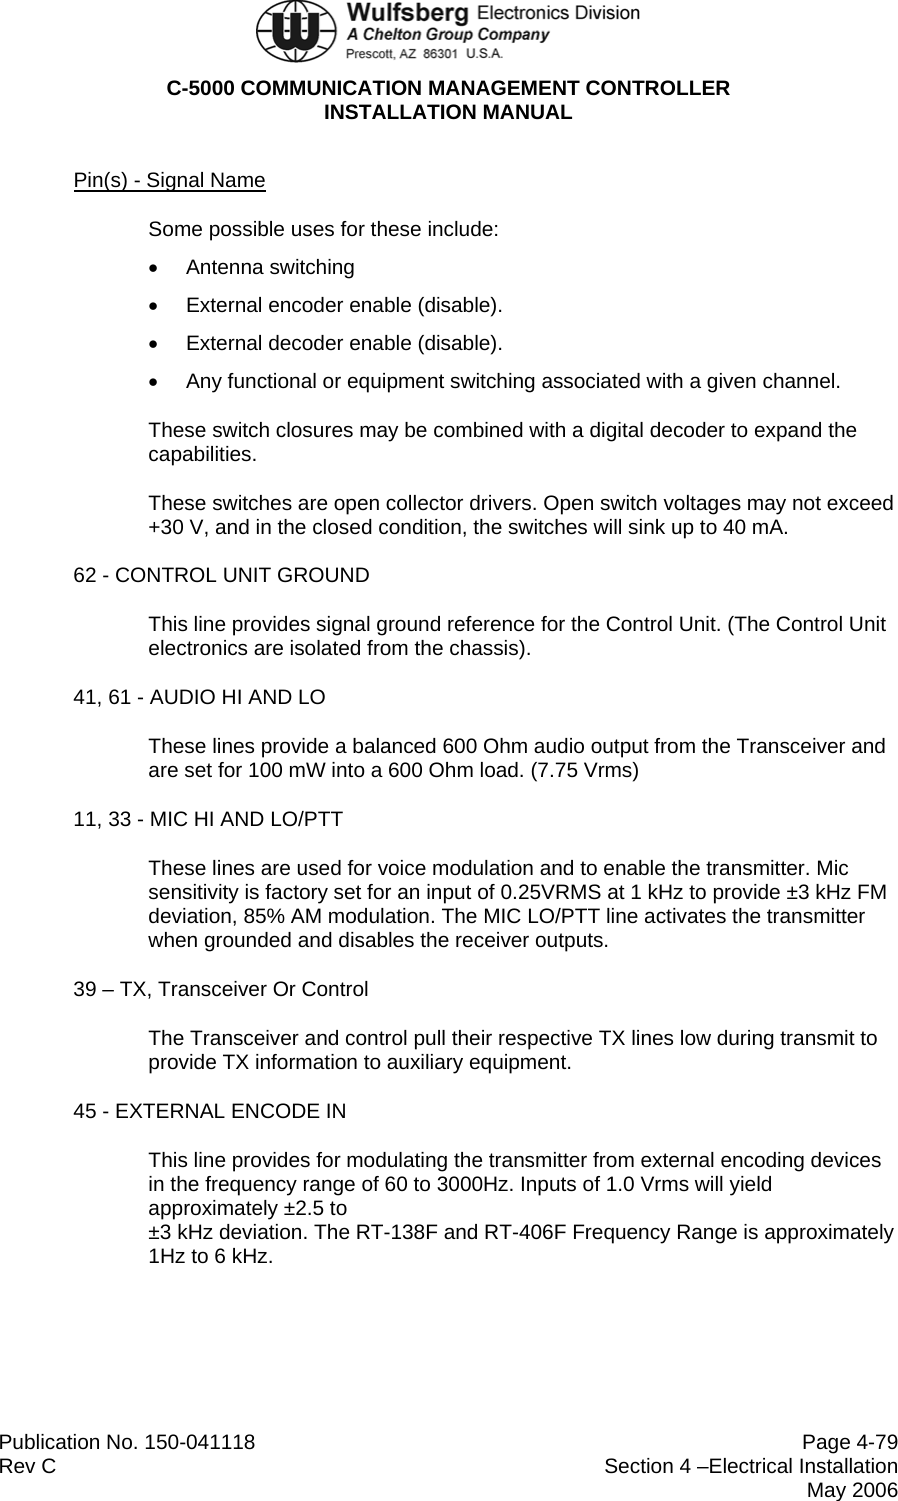  C-5000 COMMUNICATION MANAGEMENT CONTROLLER INSTALLATION MANUAL  Publication No. 150-041118  Page 4-79 Rev C  Section 4 –Electrical Installation  May 2006 Pin(s) - Signal Name Some possible uses for these include: • Antenna switching •  External encoder enable (disable). •  External decoder enable (disable). •  Any functional or equipment switching associated with a given channel. These switch closures may be combined with a digital decoder to expand the capabilities. These switches are open collector drivers. Open switch voltages may not exceed +30 V, and in the closed condition, the switches will sink up to 40 mA. 62 - CONTROL UNIT GROUND This line provides signal ground reference for the Control Unit. (The Control Unit electronics are isolated from the chassis). 41, 61 - AUDIO HI AND LO These lines provide a balanced 600 Ohm audio output from the Transceiver and are set for 100 mW into a 600 Ohm load. (7.75 Vrms) 11, 33 - MIC HI AND LO/PTT These lines are used for voice modulation and to enable the transmitter. Mic sensitivity is factory set for an input of 0.25VRMS at 1 kHz to provide ±3 kHz FM deviation, 85% AM modulation. The MIC LO/PTT line activates the transmitter when grounded and disables the receiver outputs. 39 – TX, Transceiver Or Control The Transceiver and control pull their respective TX lines low during transmit to provide TX information to auxiliary equipment. 45 - EXTERNAL ENCODE IN This line provides for modulating the transmitter from external encoding devices in the frequency range of 60 to 3000Hz. Inputs of 1.0 Vrms will yield approximately ±2.5 to  ±3 kHz deviation. The RT-138F and RT-406F Frequency Range is approximately 1Hz to 6 kHz. 